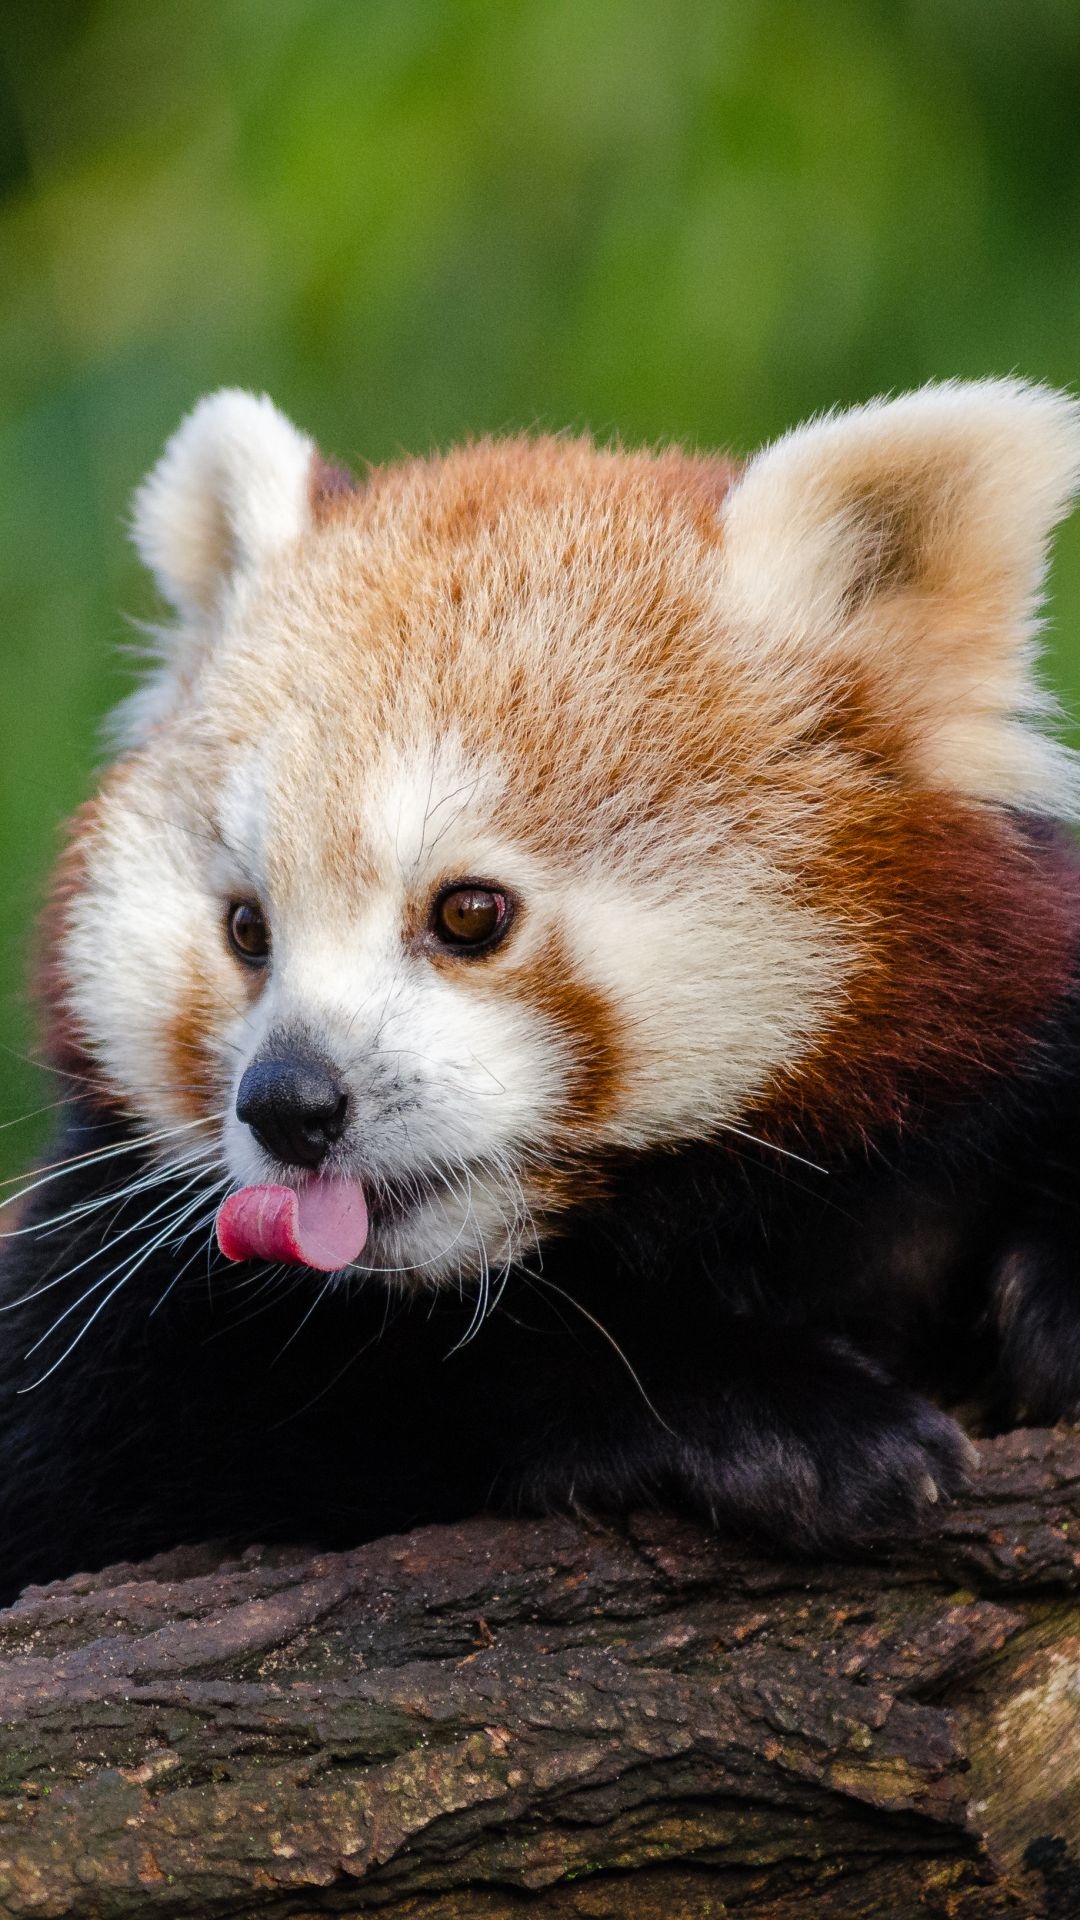 Baby Animal, Red panda mobile wallpaper, Fluffy and adorable, 1080x1920 Full HD Handy